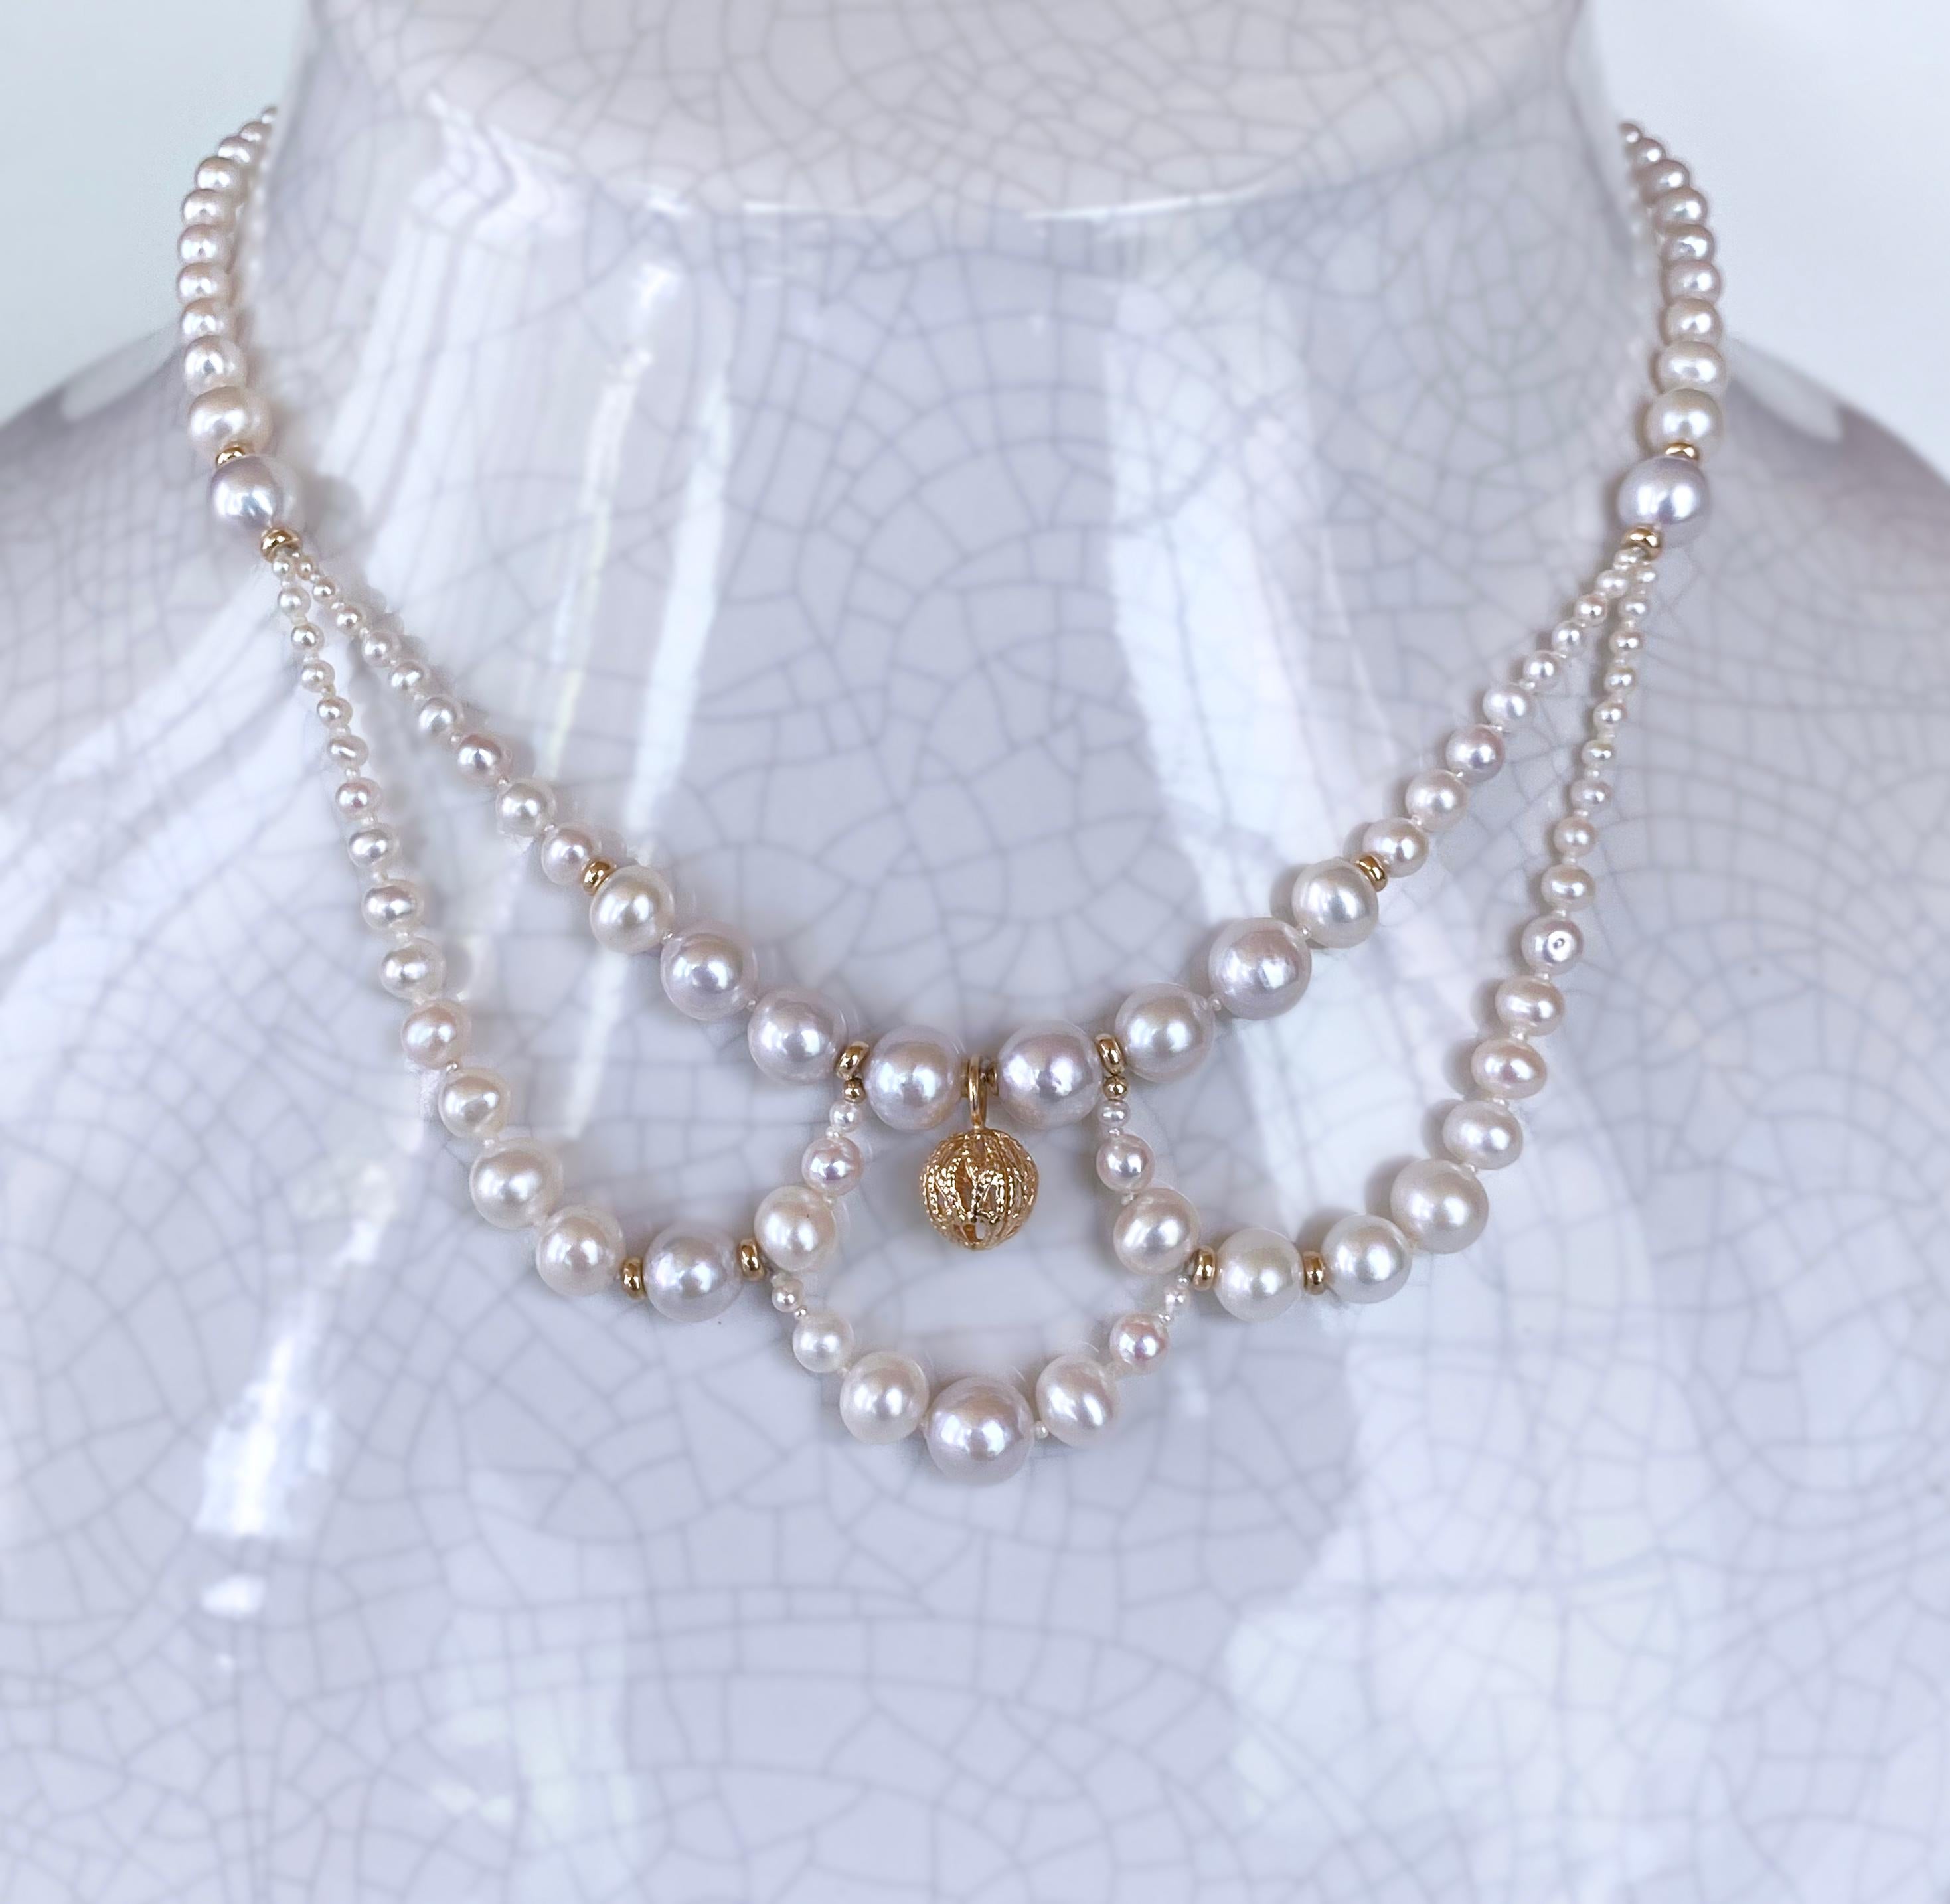 Marina J. Draped Victorian Inspired Pearl & Solid 14k Yellow Gold Necklace In New Condition For Sale In Los Angeles, CA